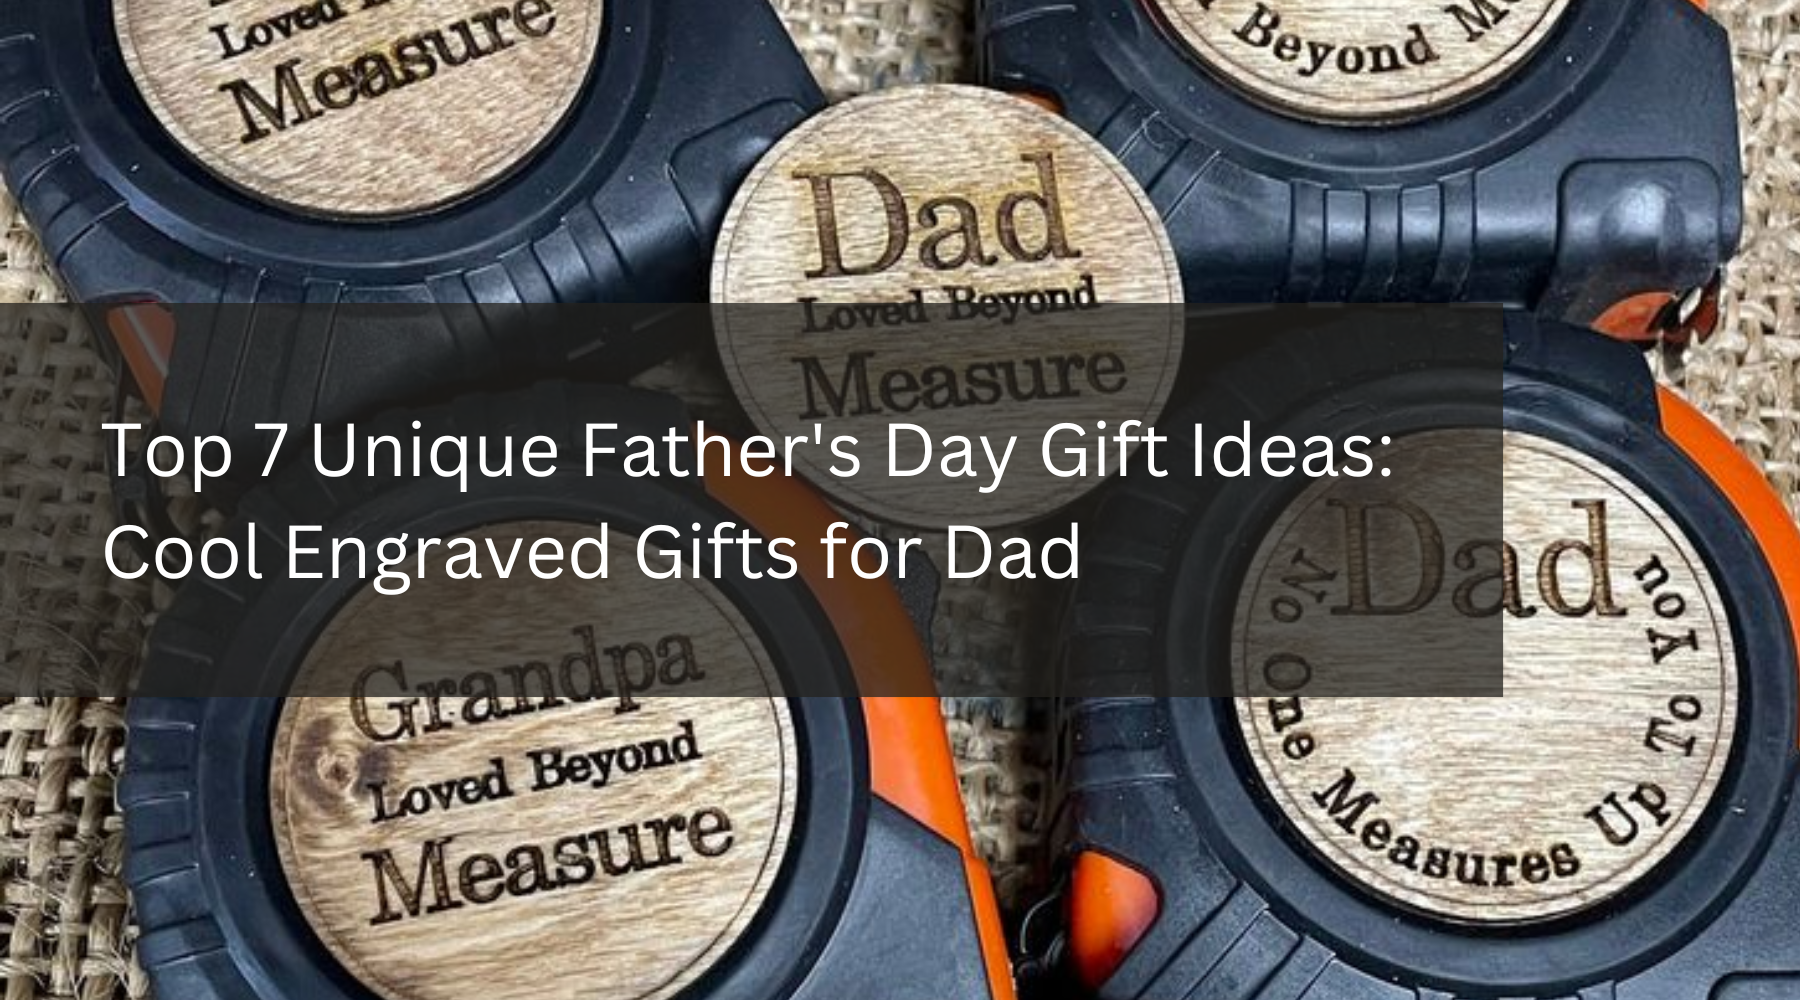 Top 7 Unique Father's Day Gift Ideas: Cool Engraved Gifts for Dad